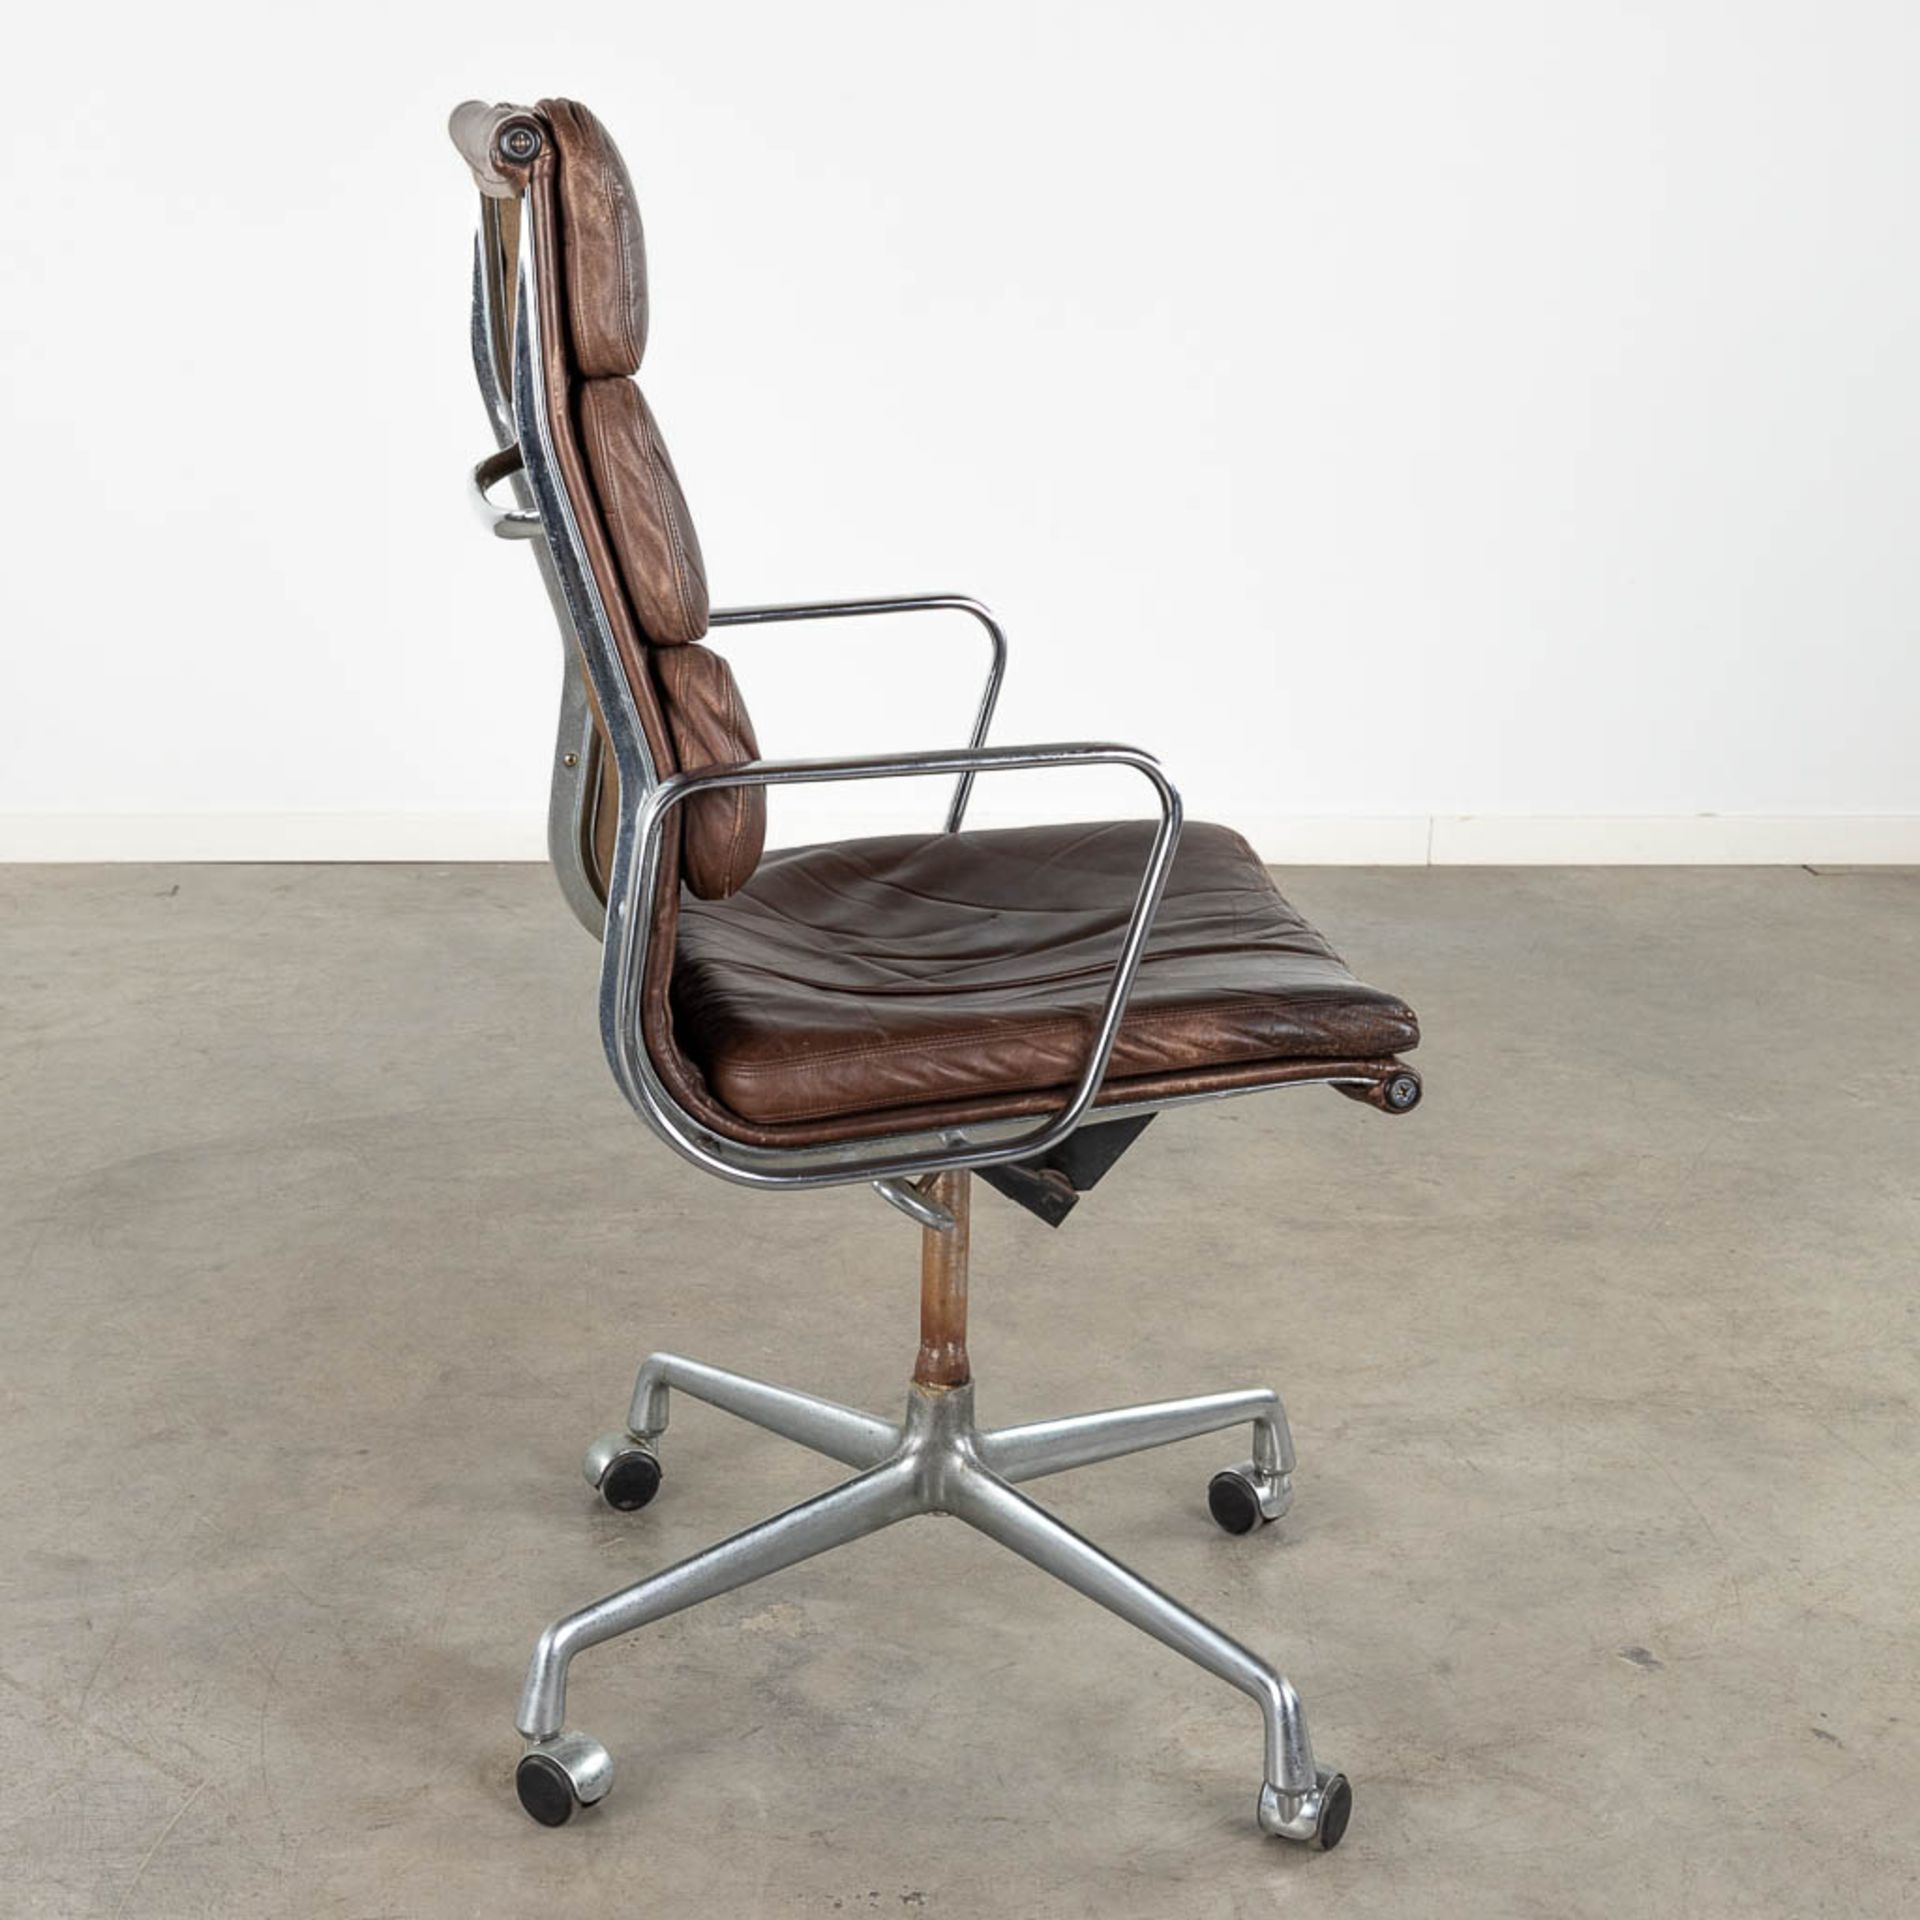 Charles &amp; Ray EAMES (XX-XXI) 'Soft Pad Office Chair' for Herman Miller. (D:111 x W:59 x H:63 cm) - Image 6 of 12